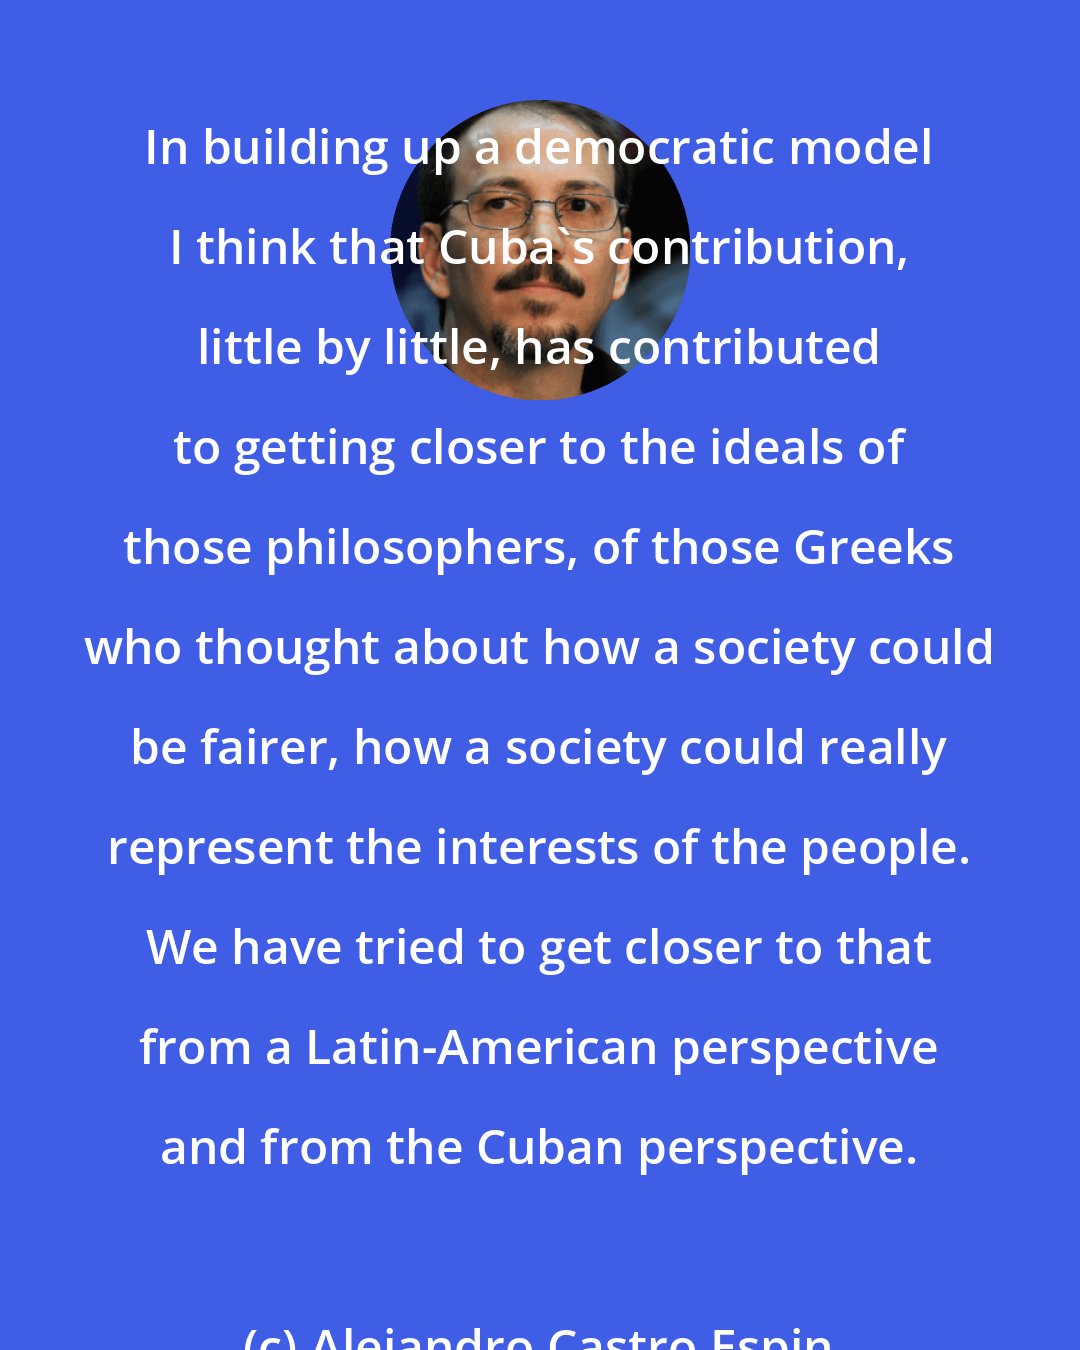 Alejandro Castro Espin: In building up a democratic model I think that Cuba's contribution, little by little, has contributed to getting closer to the ideals of those philosophers, of those Greeks who thought about how a society could be fairer, how a society could really represent the interests of the people. We have tried to get closer to that from a Latin-American perspective and from the Cuban perspective.